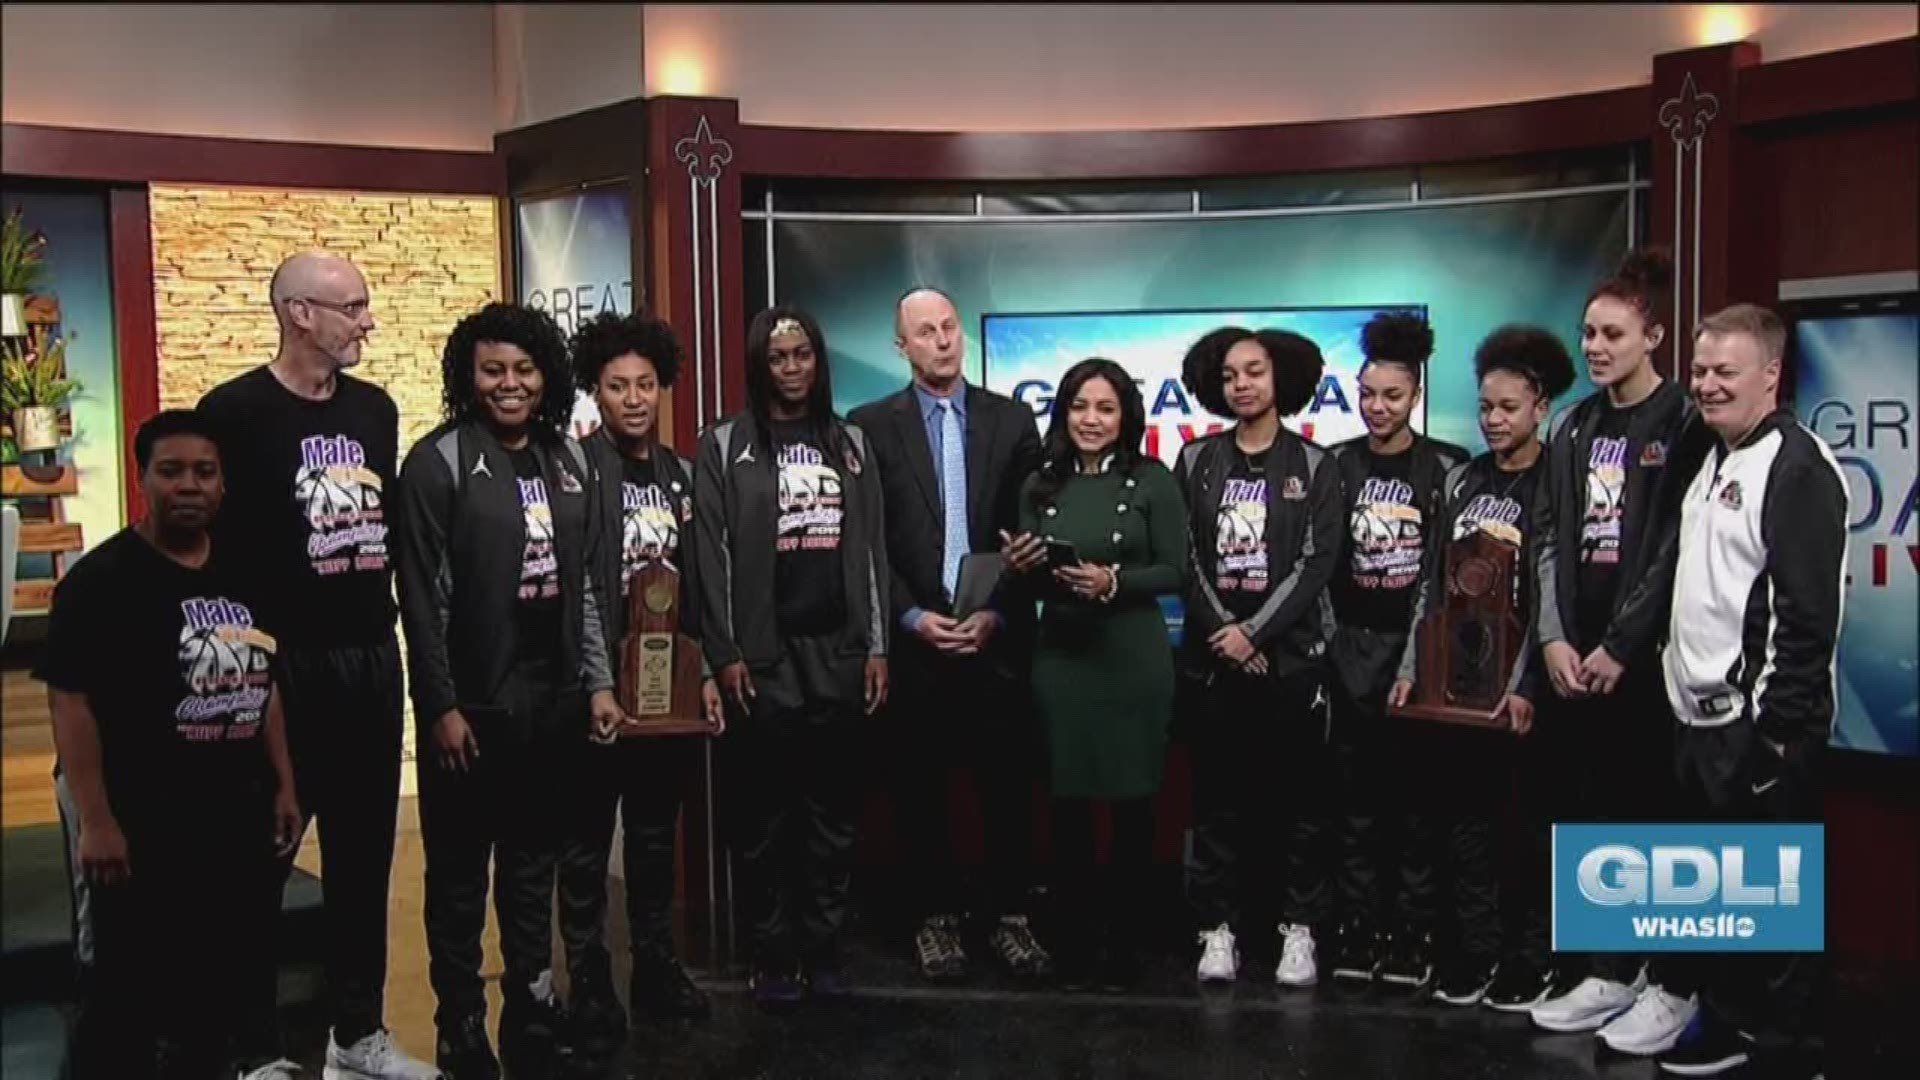 The Lady Bulldogs from Male High School made it to the final four of the Sweet Sixteen. Some of the team members stopped by Great Day Live with their coaches to talk about the season and what they have coming up next.